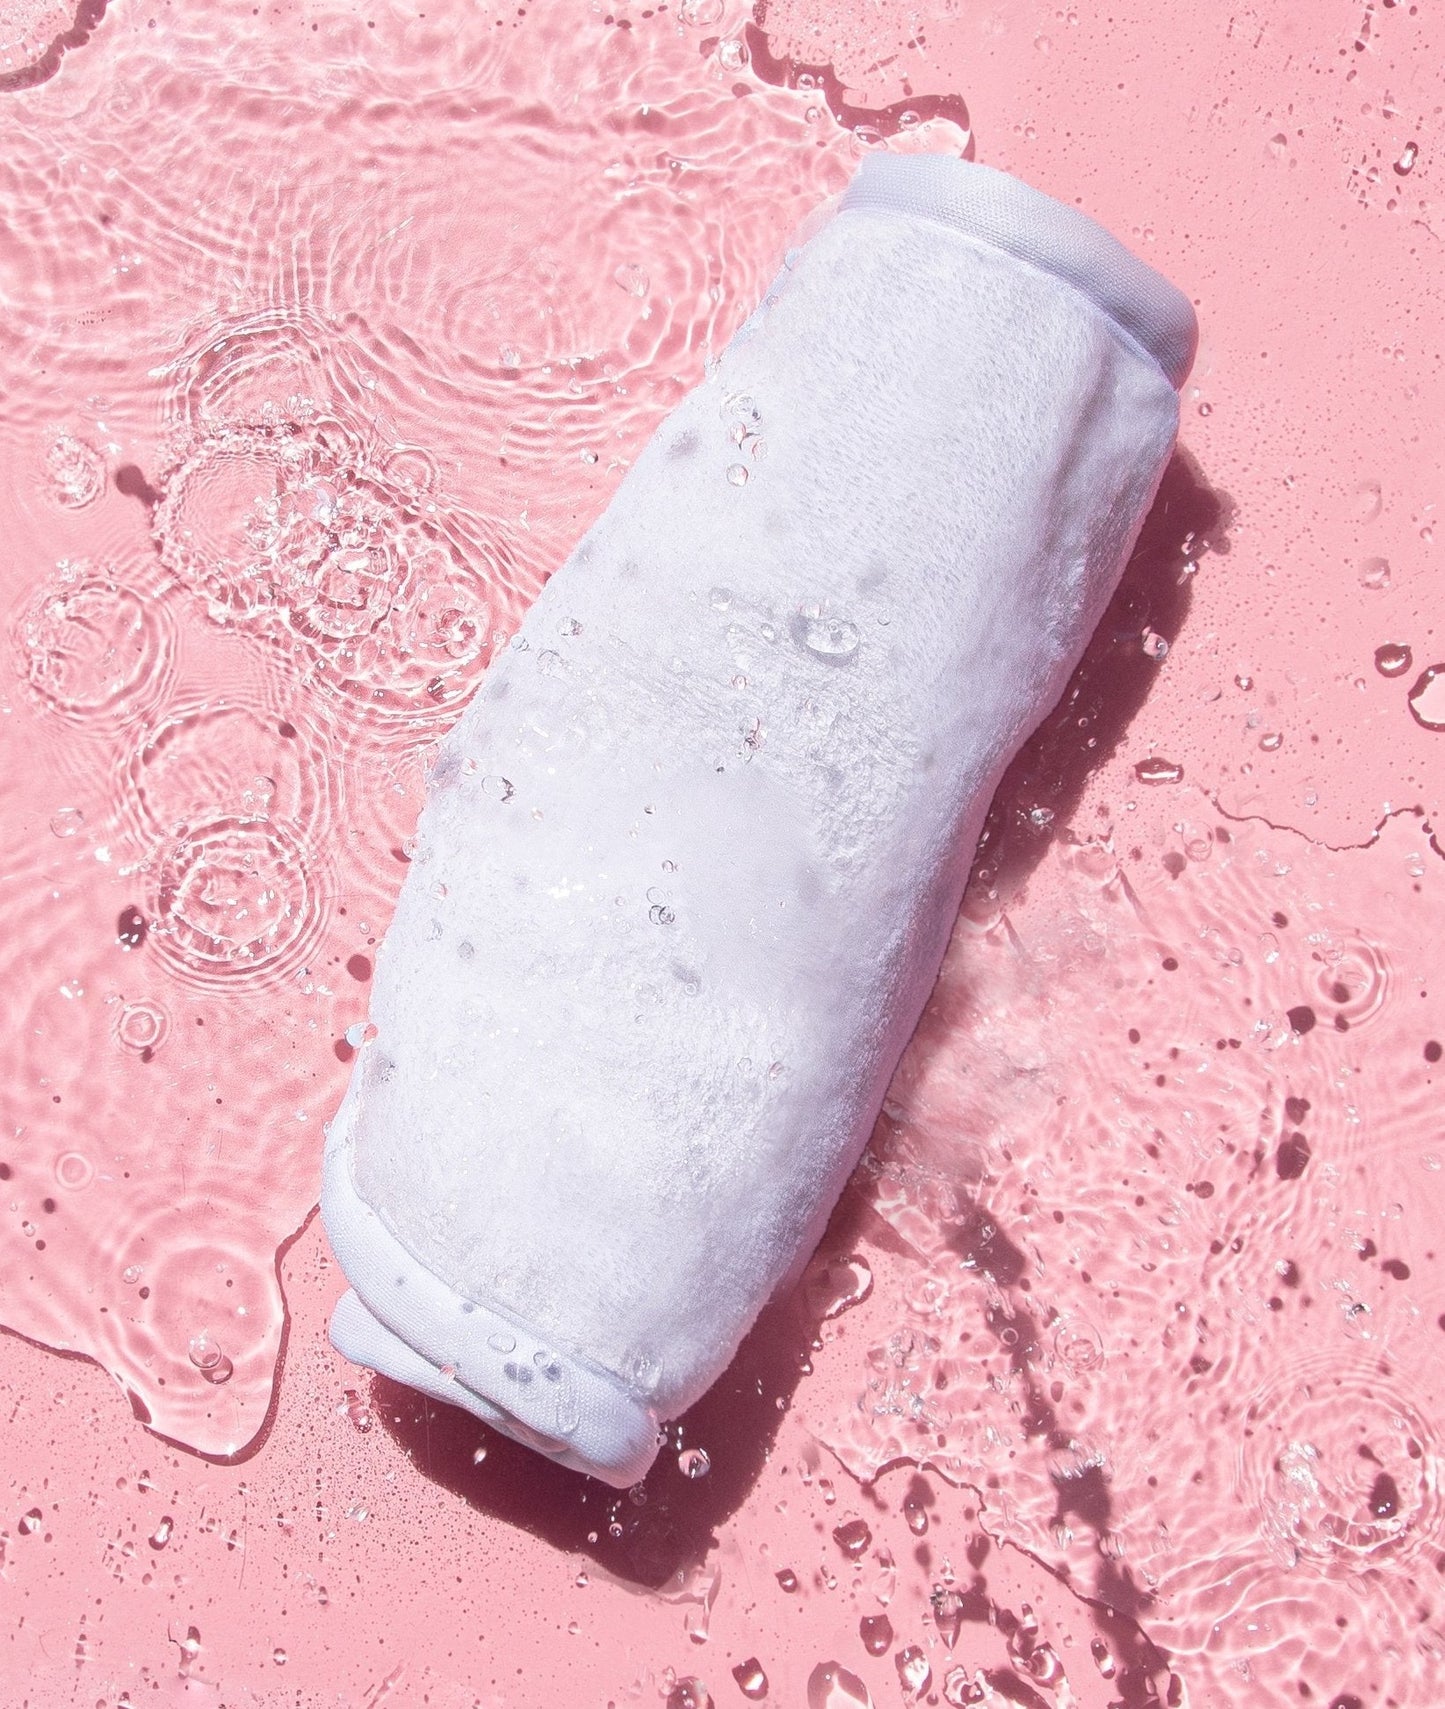 Rolled up Clean White MakeUp Eraser surrounded by water.